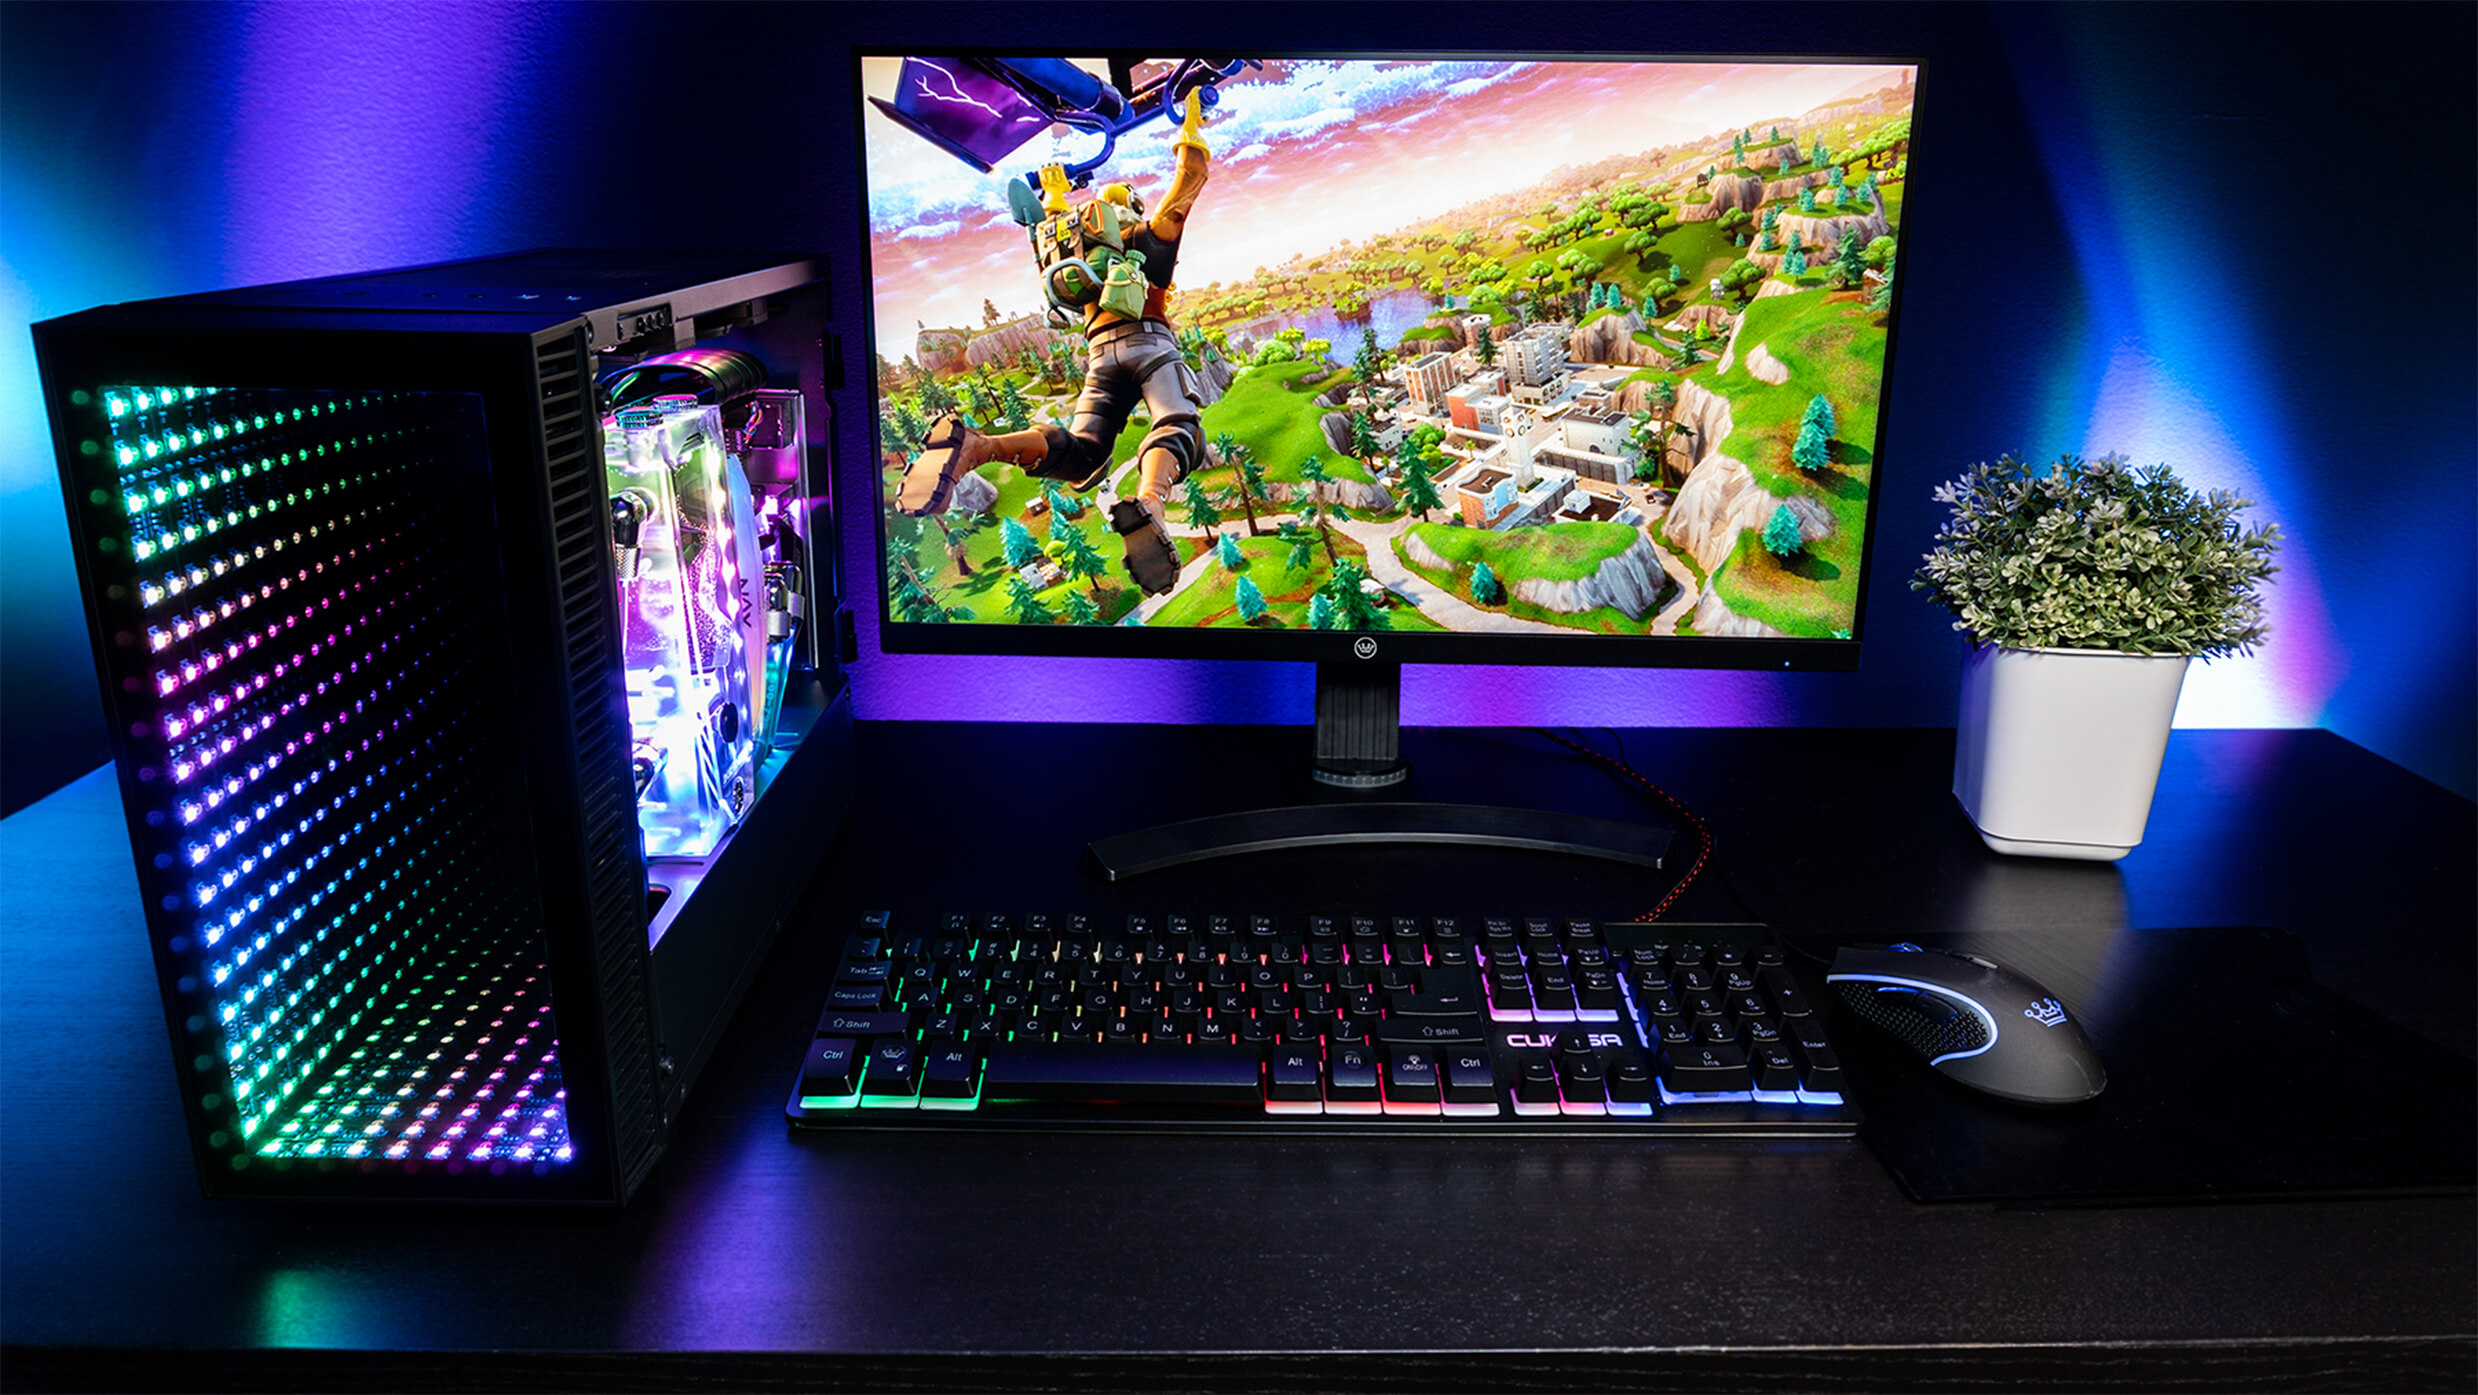 CUK Continuum Mini Gaming Desktop paired with CUK Bionic Monitor and CUK Gaming Keyboard & Mouse